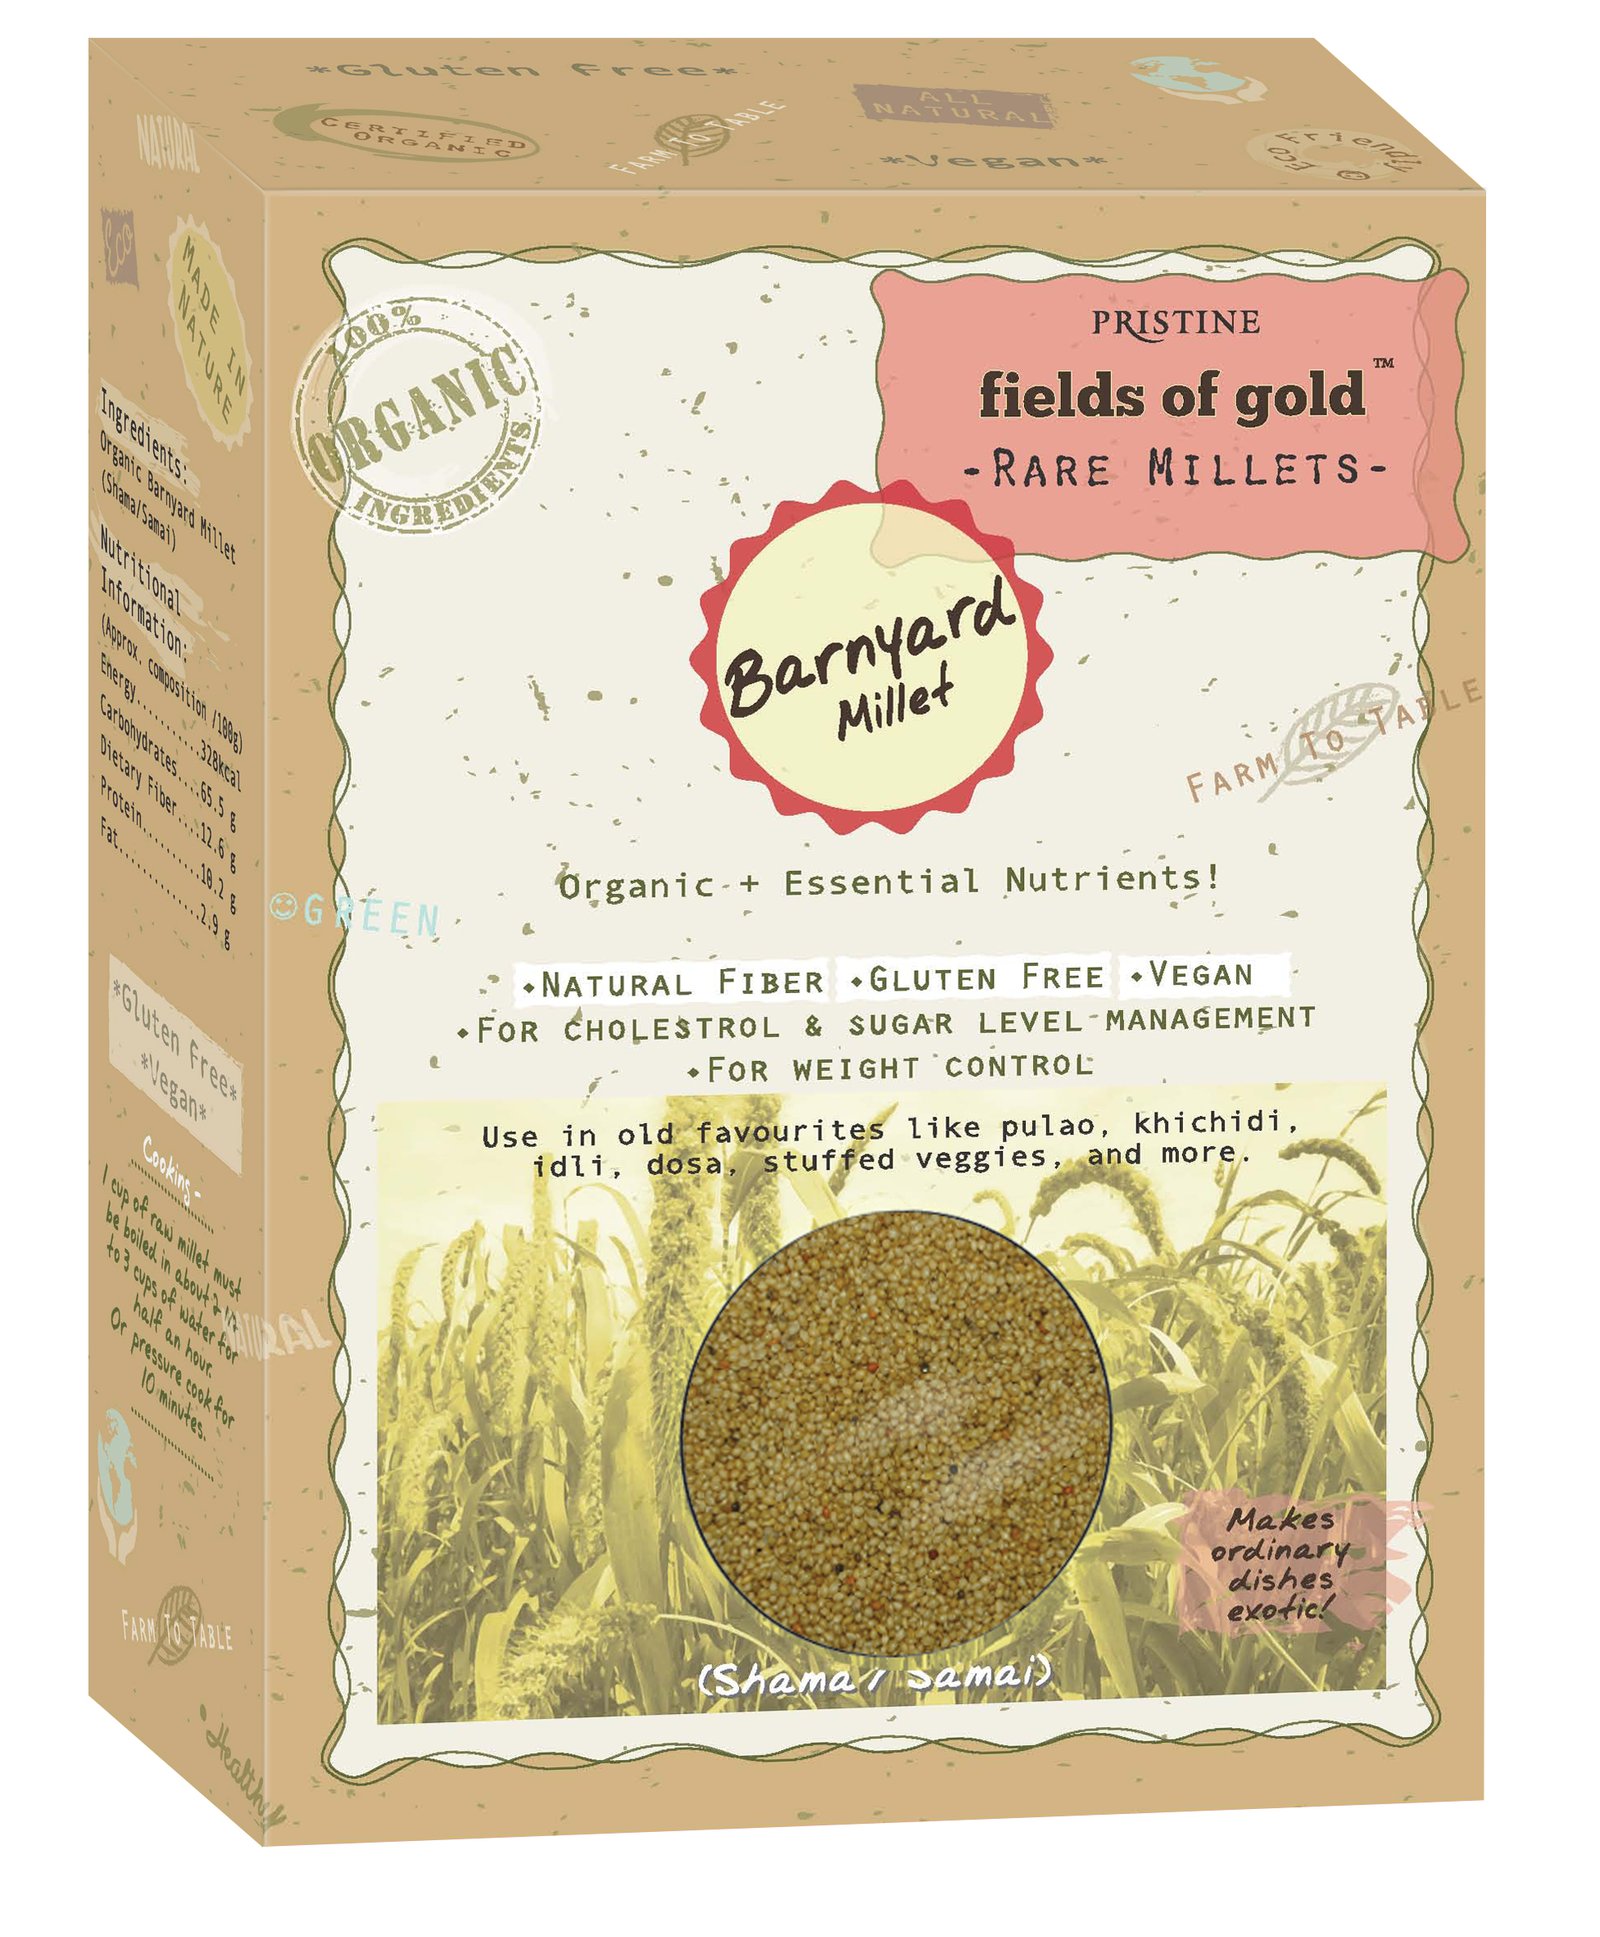 pristine-organics-offers-its-individual-range-of-millets-products